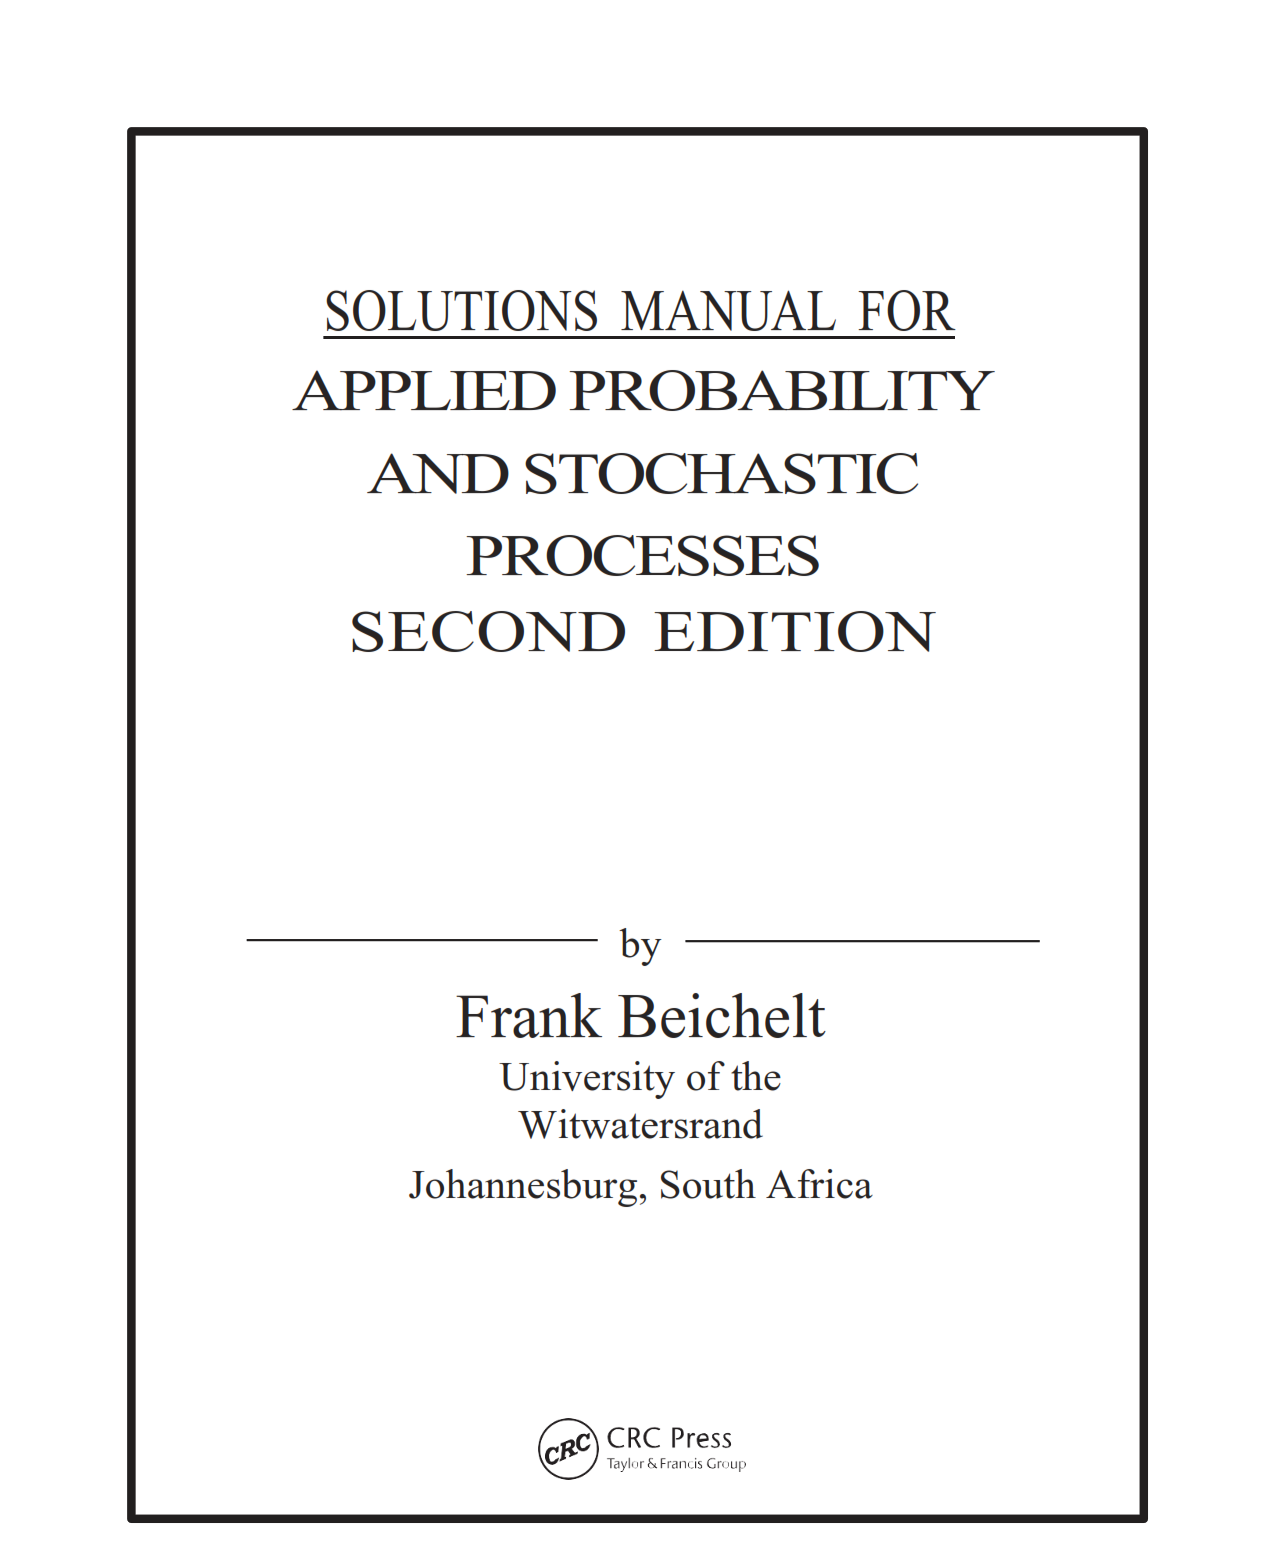 Download free applied probability and stochastic processes Frank Beichelt 2nd edition solutions manual pdf | Gioumeh solution